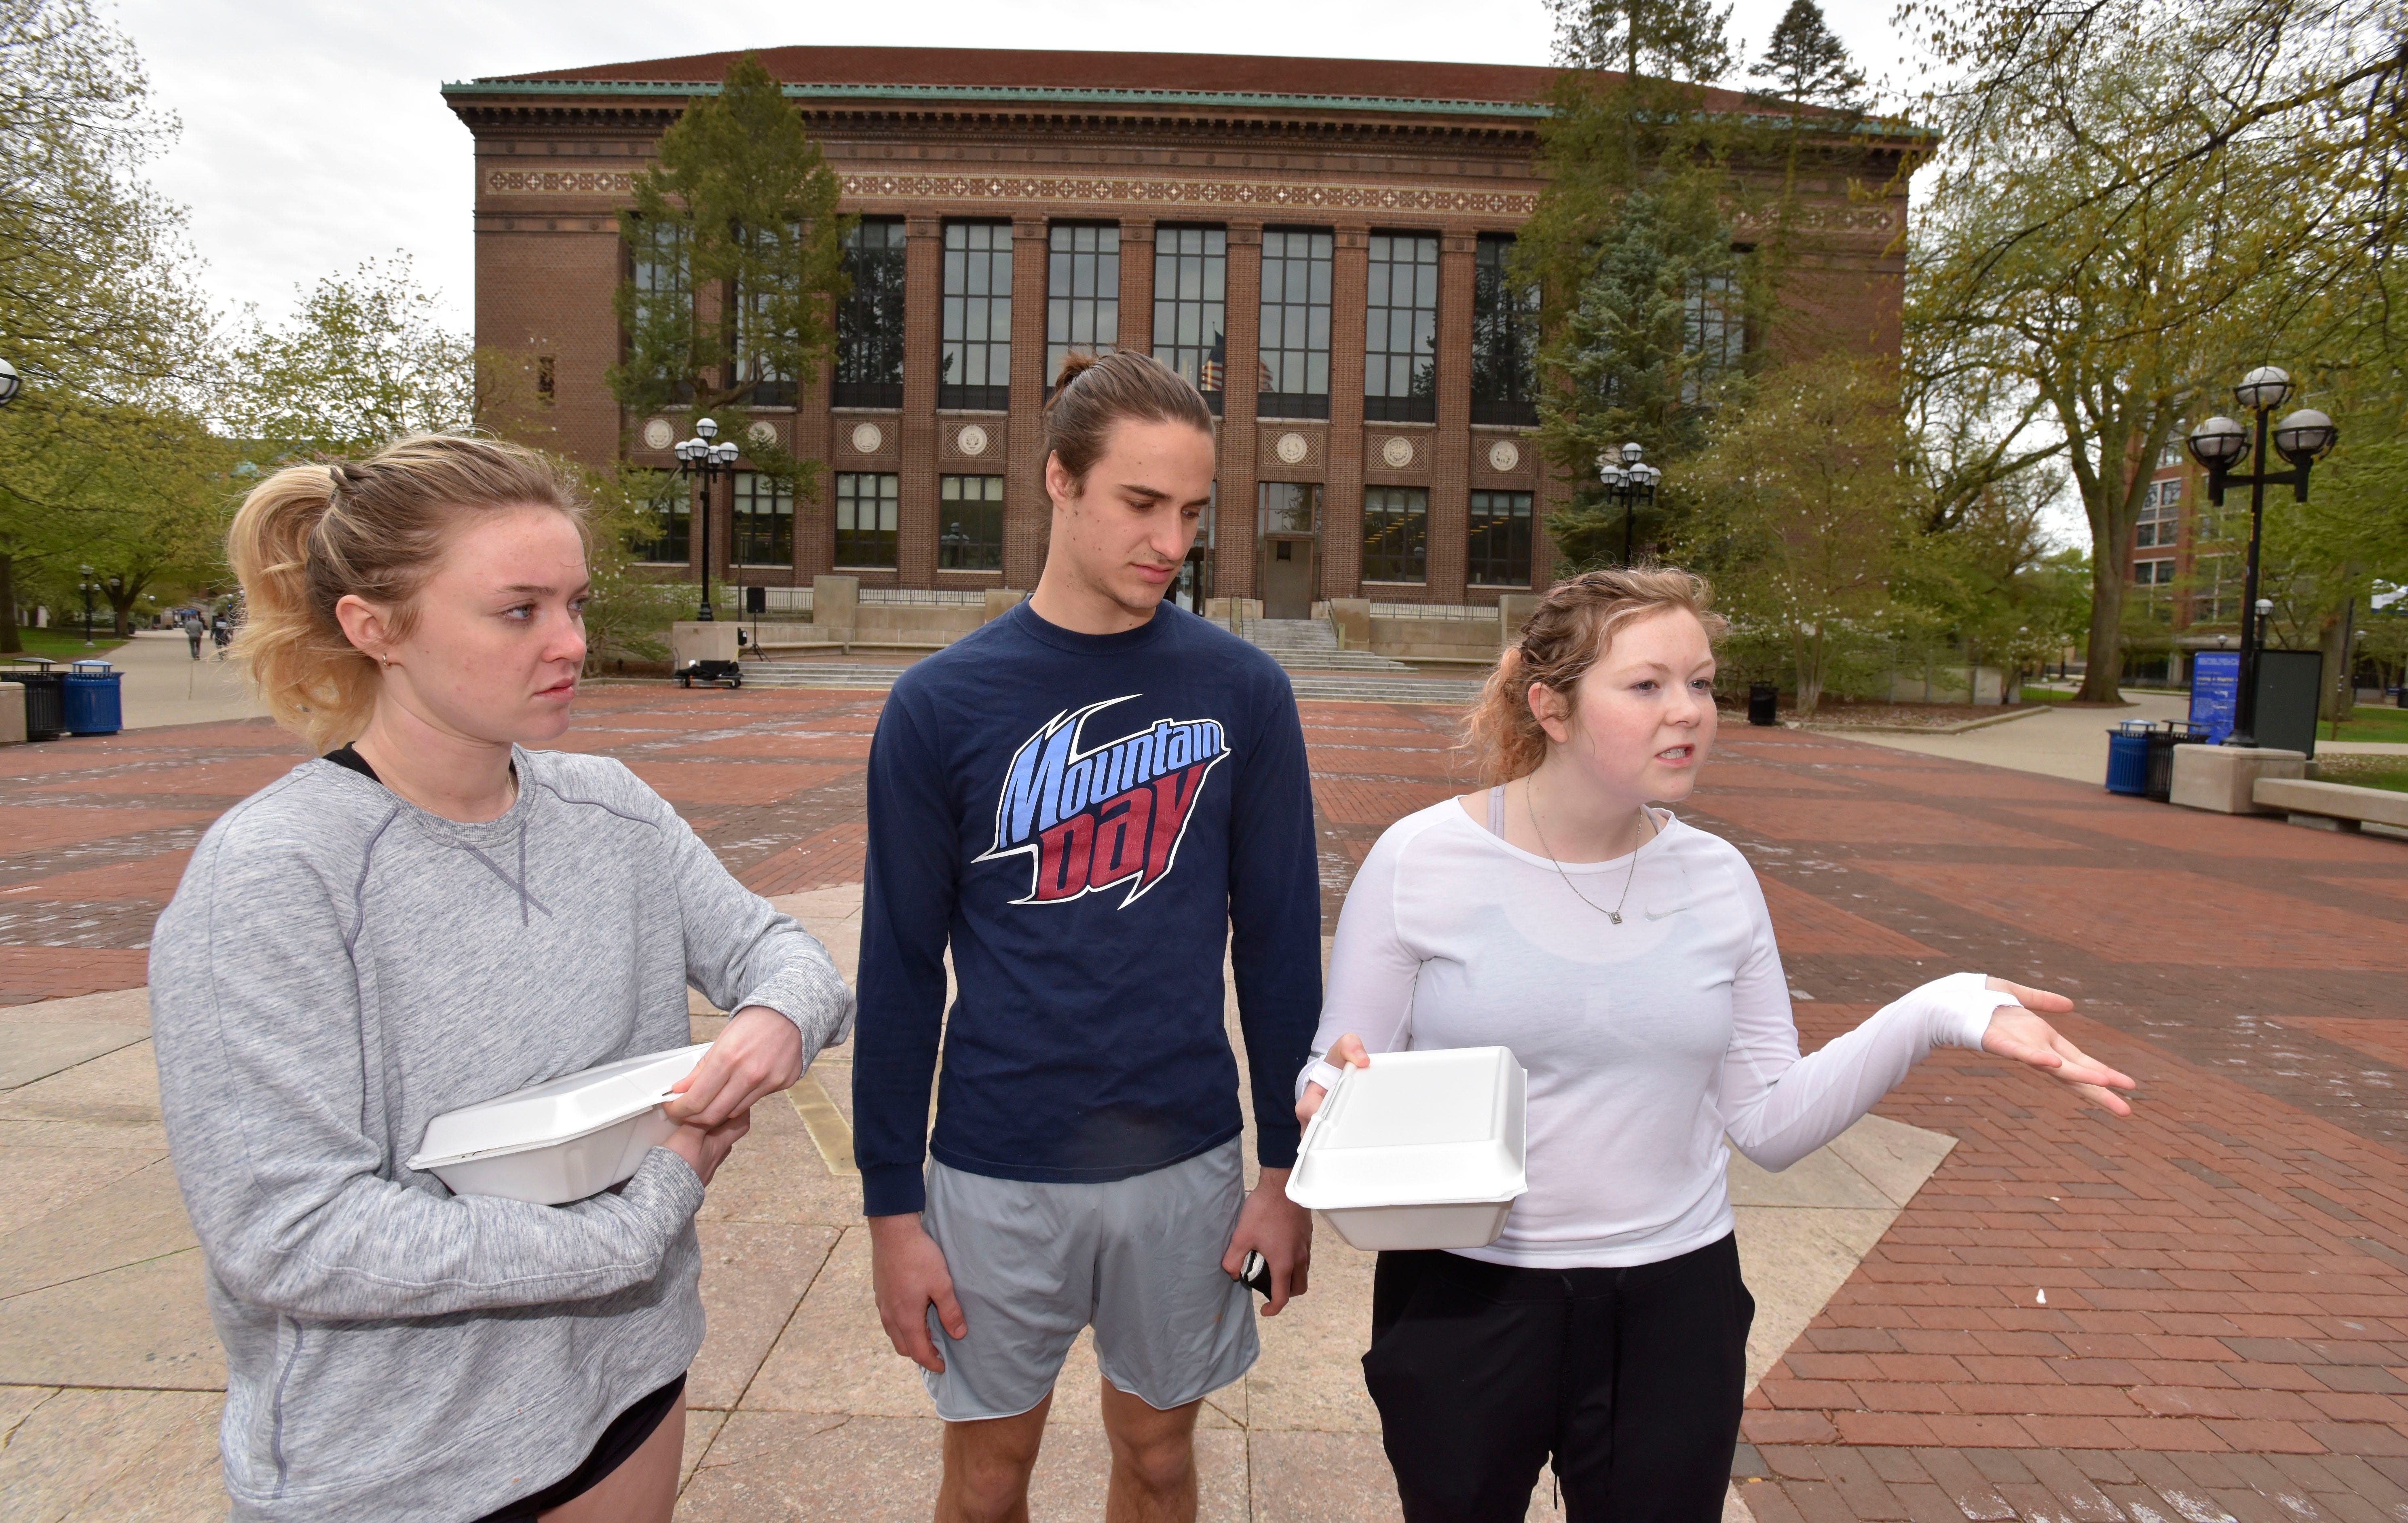 Grace Fanning, left, of New Jersey, Jason Knopf, of the Chicago area and Meg Wynne, of Indianapolis, talk about school debt on the Diag on the main campus of the University of Michigan in Ann Arbor.